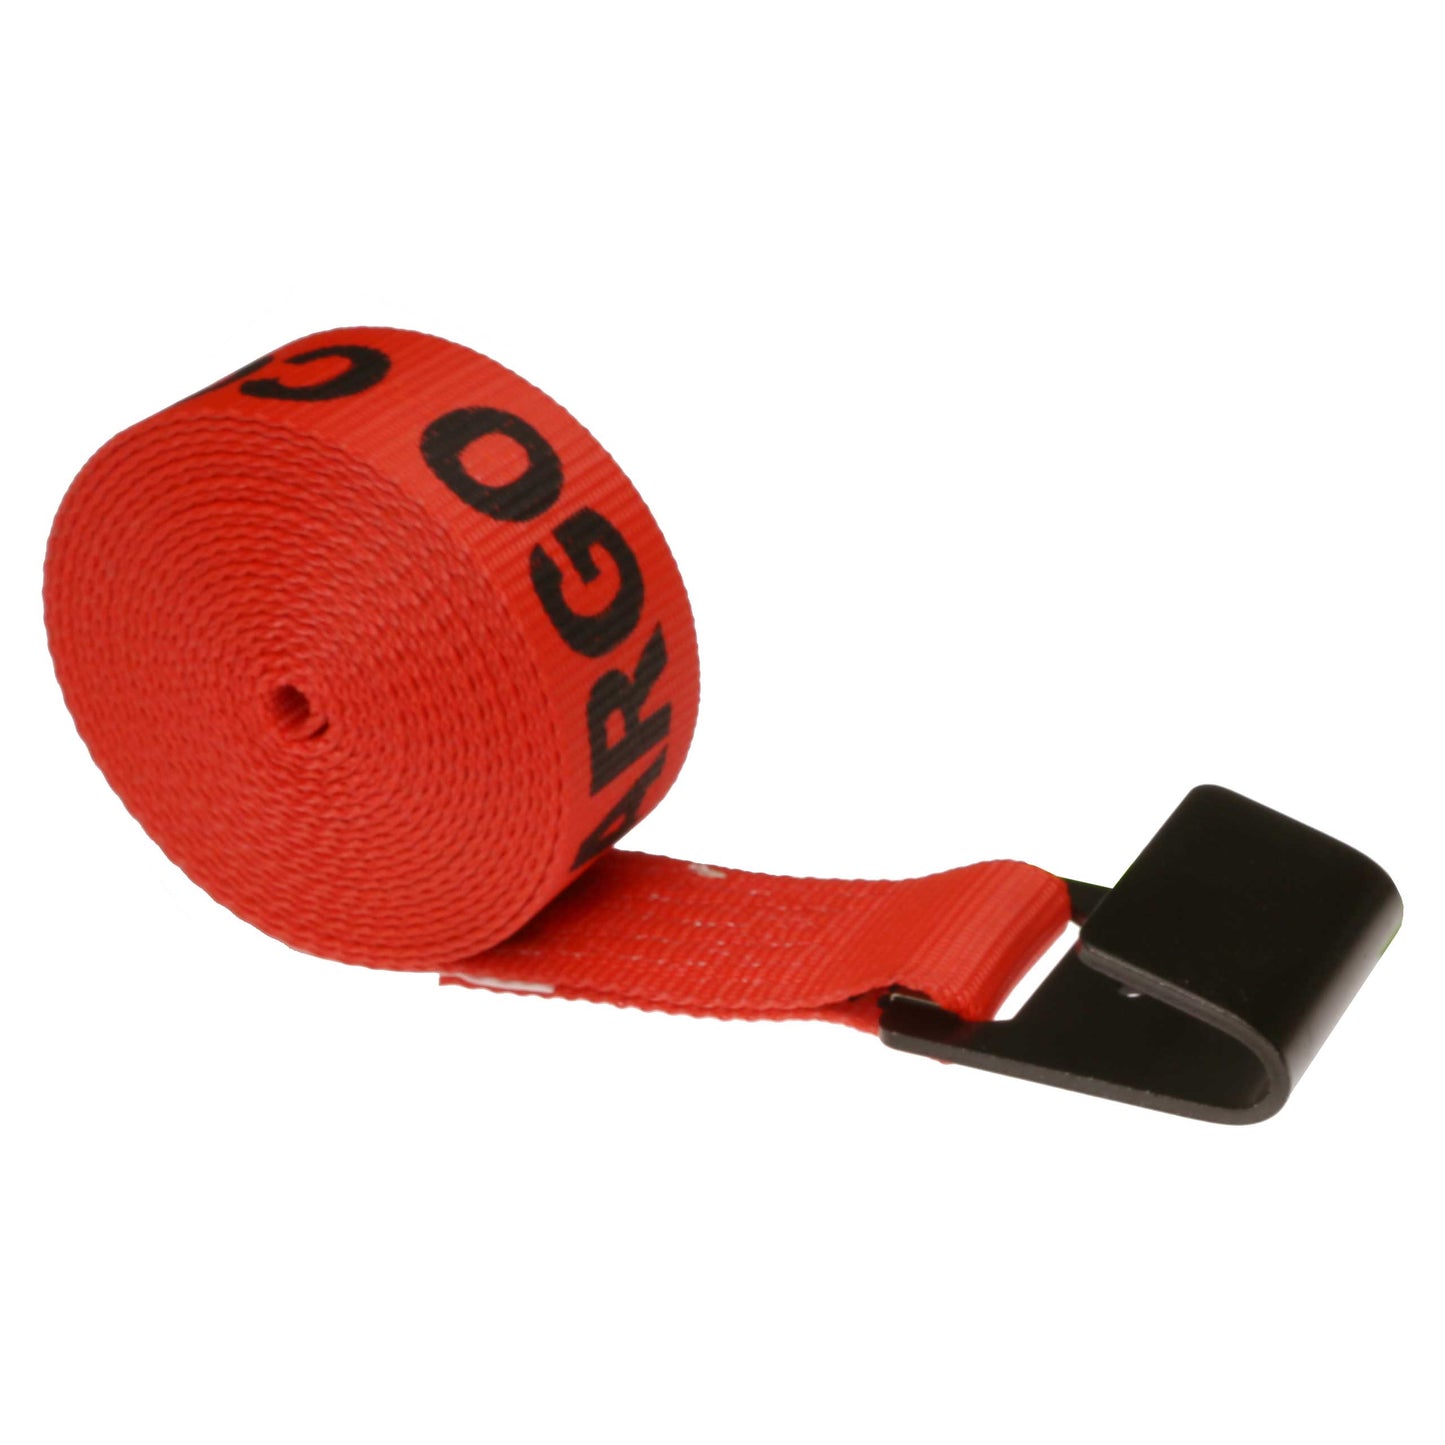 2 inch x 27 foot Red Winch Strap with Flat Hook